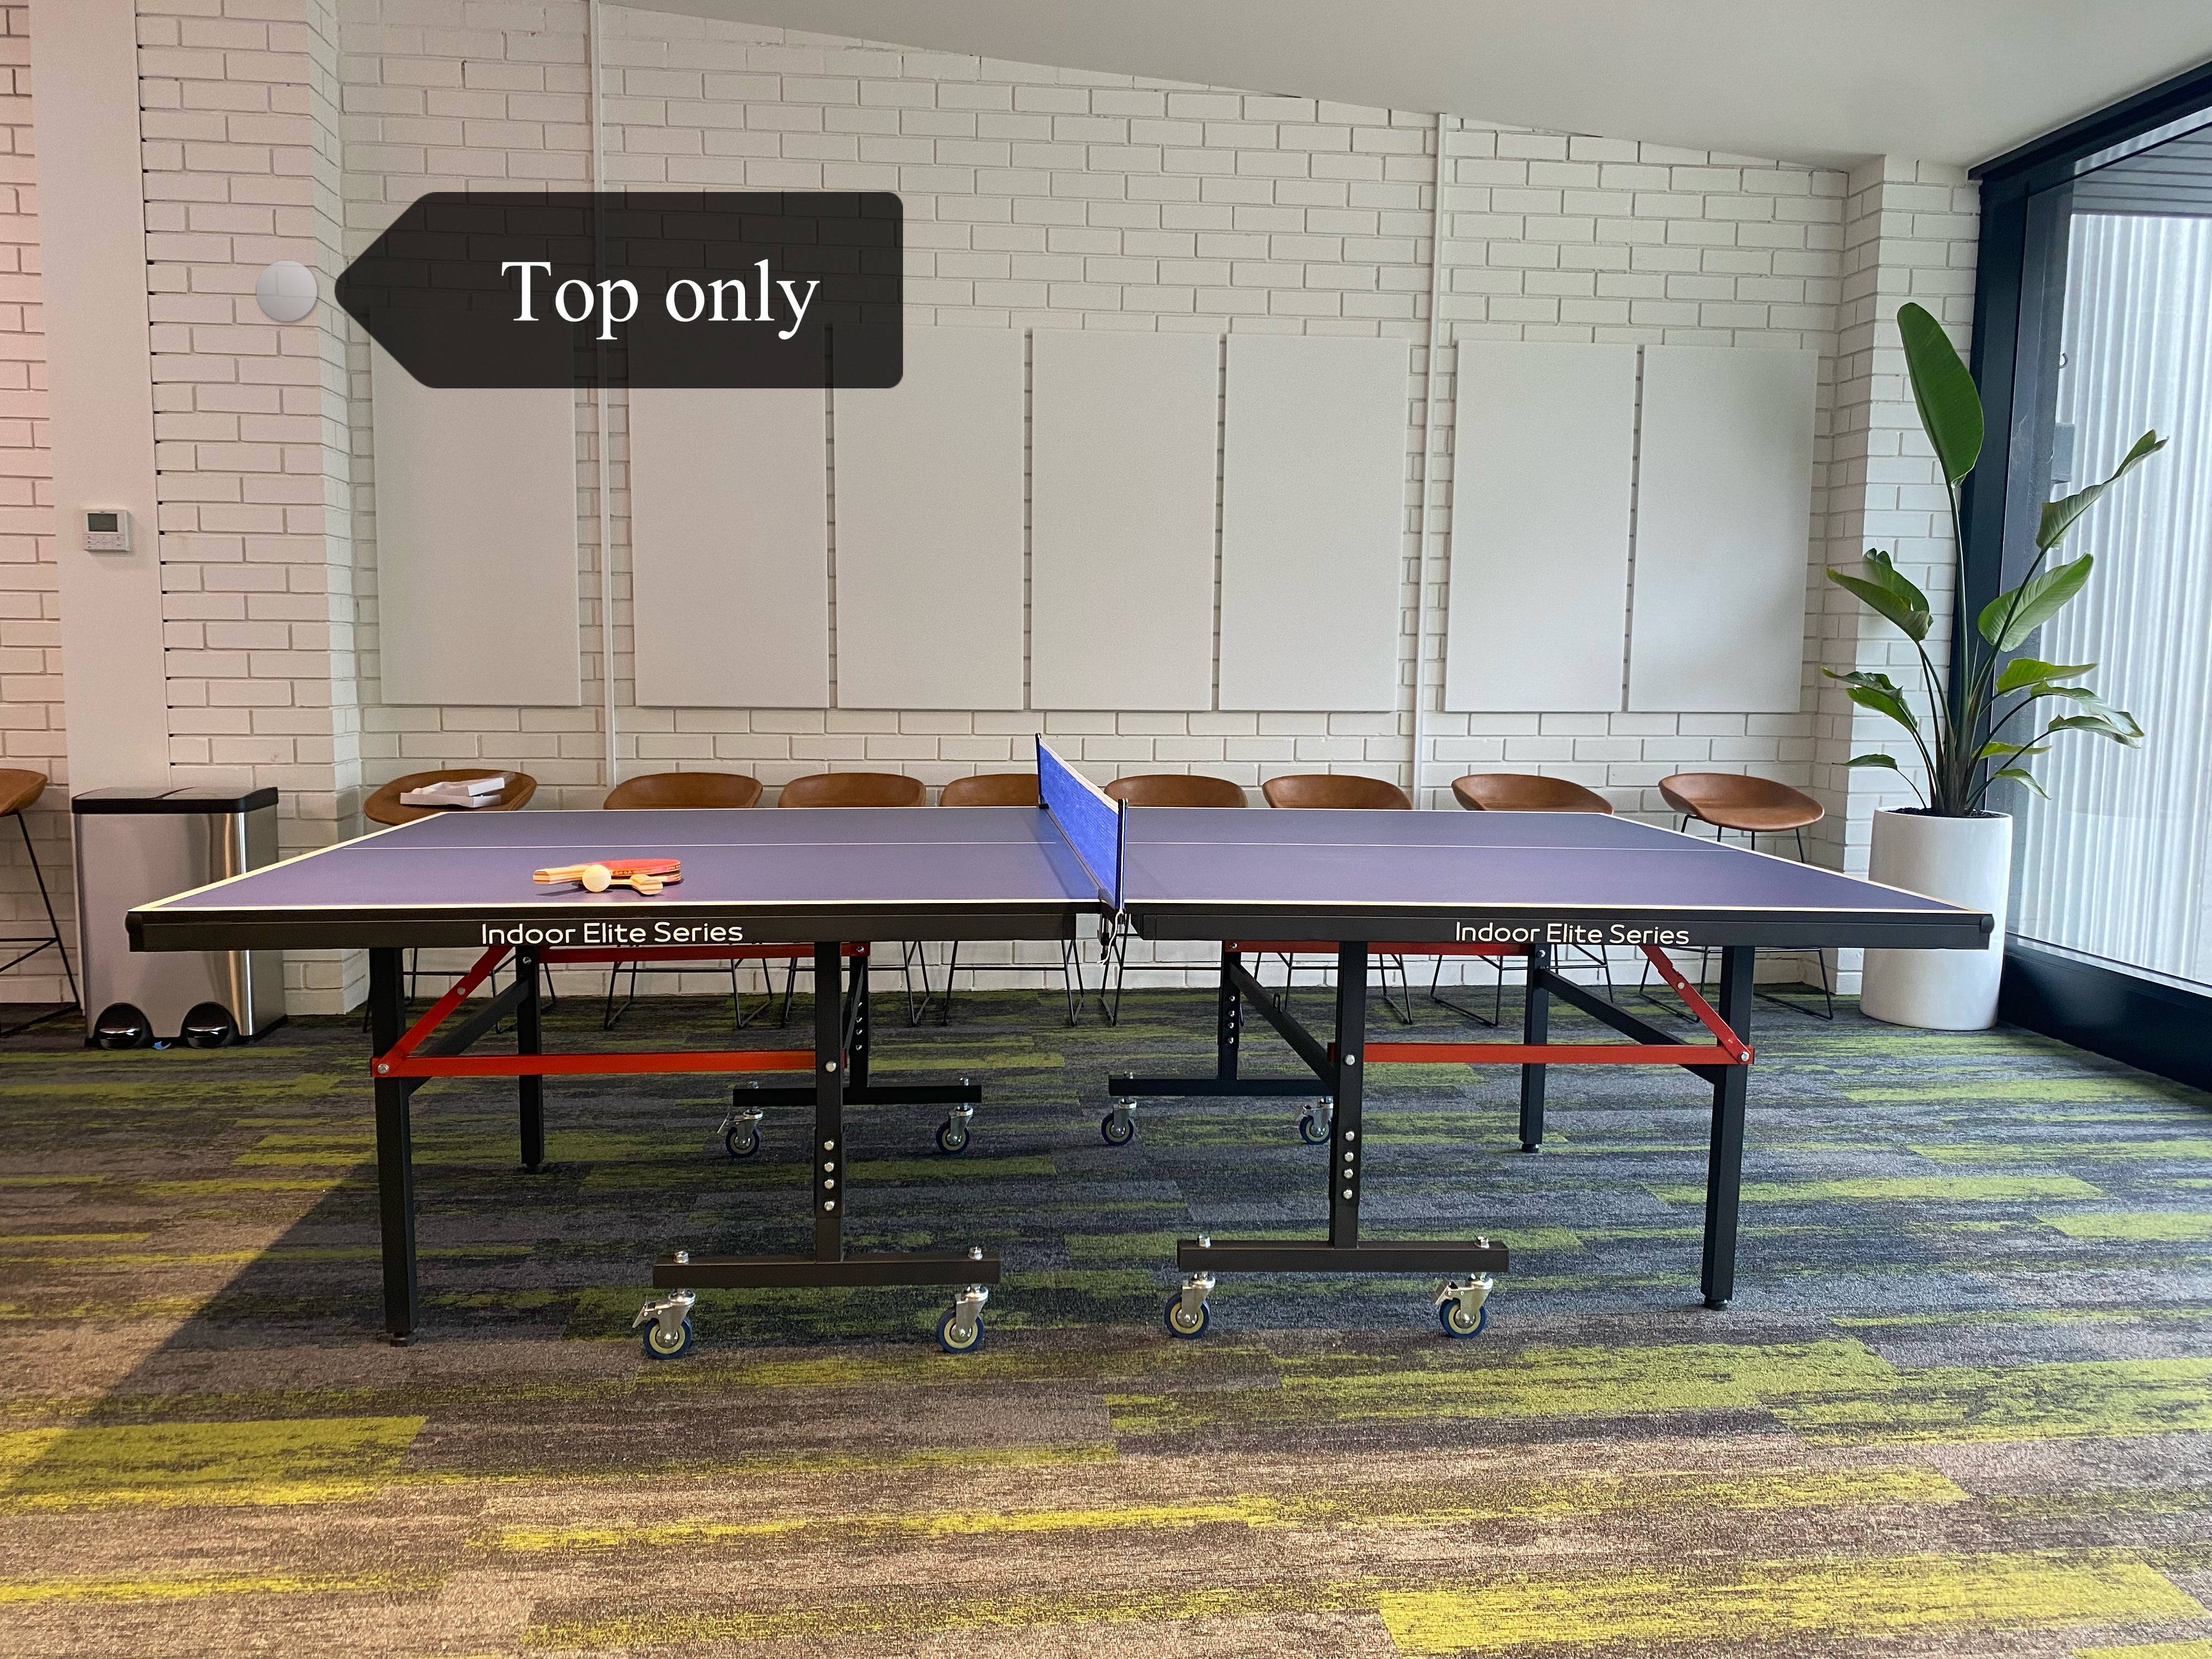 Table Tennis Table Nice Addition to Office Game Area This Product Offers Top Only